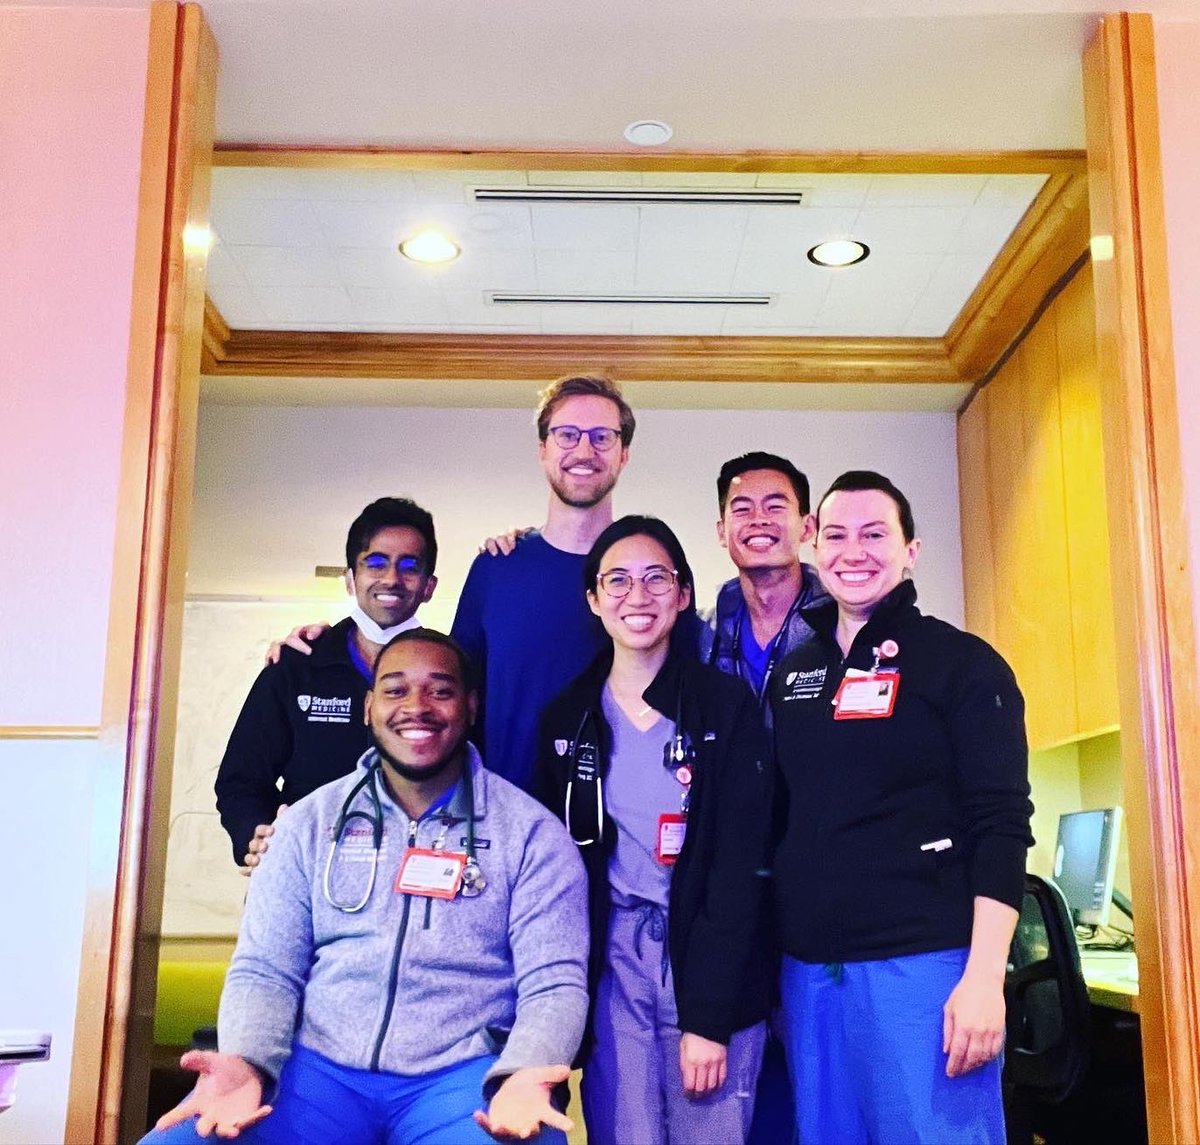 Learned 2 key lessons on nights: 1) food gives you fuel 2) your teammates give you life. Shoutout to this incredible group for getting me through a wild 2 weeks of nights! @StanfordMedRes